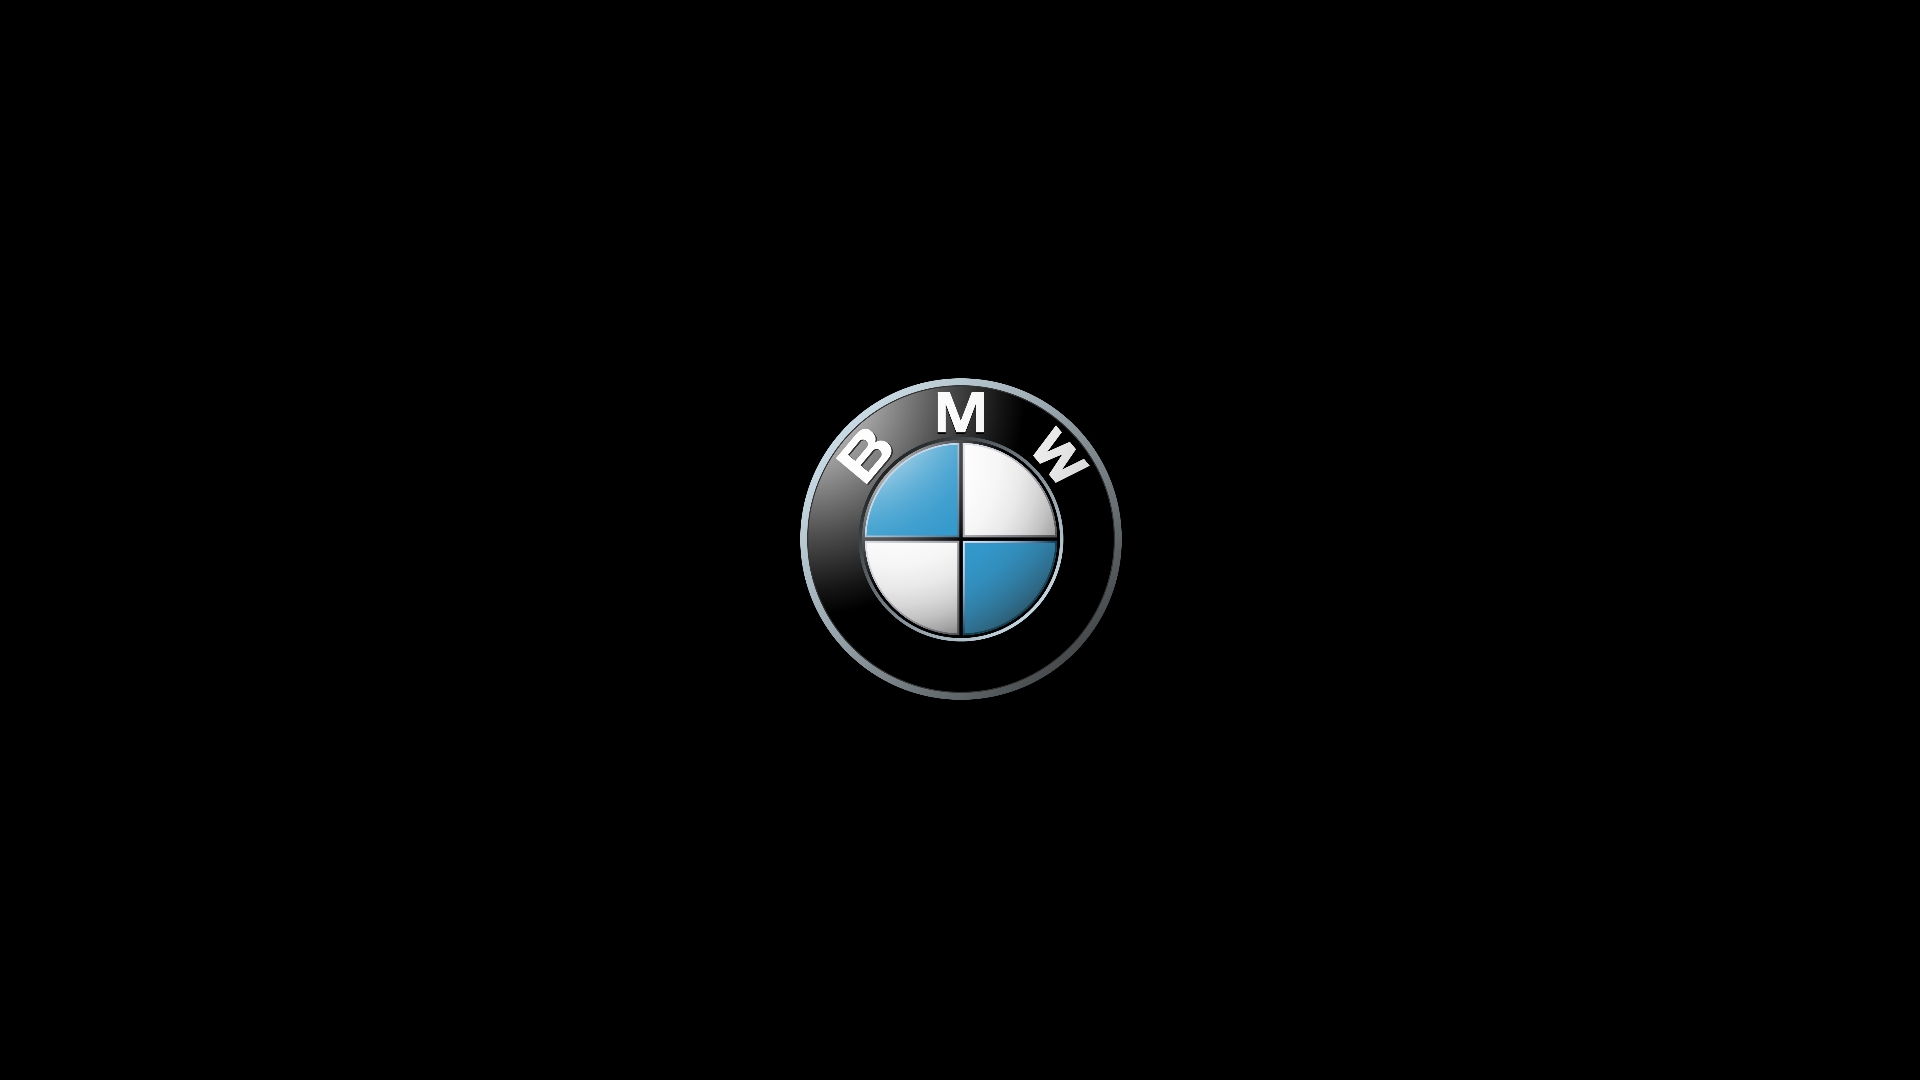 Bmw Logo Wallpaper Pictures Image For